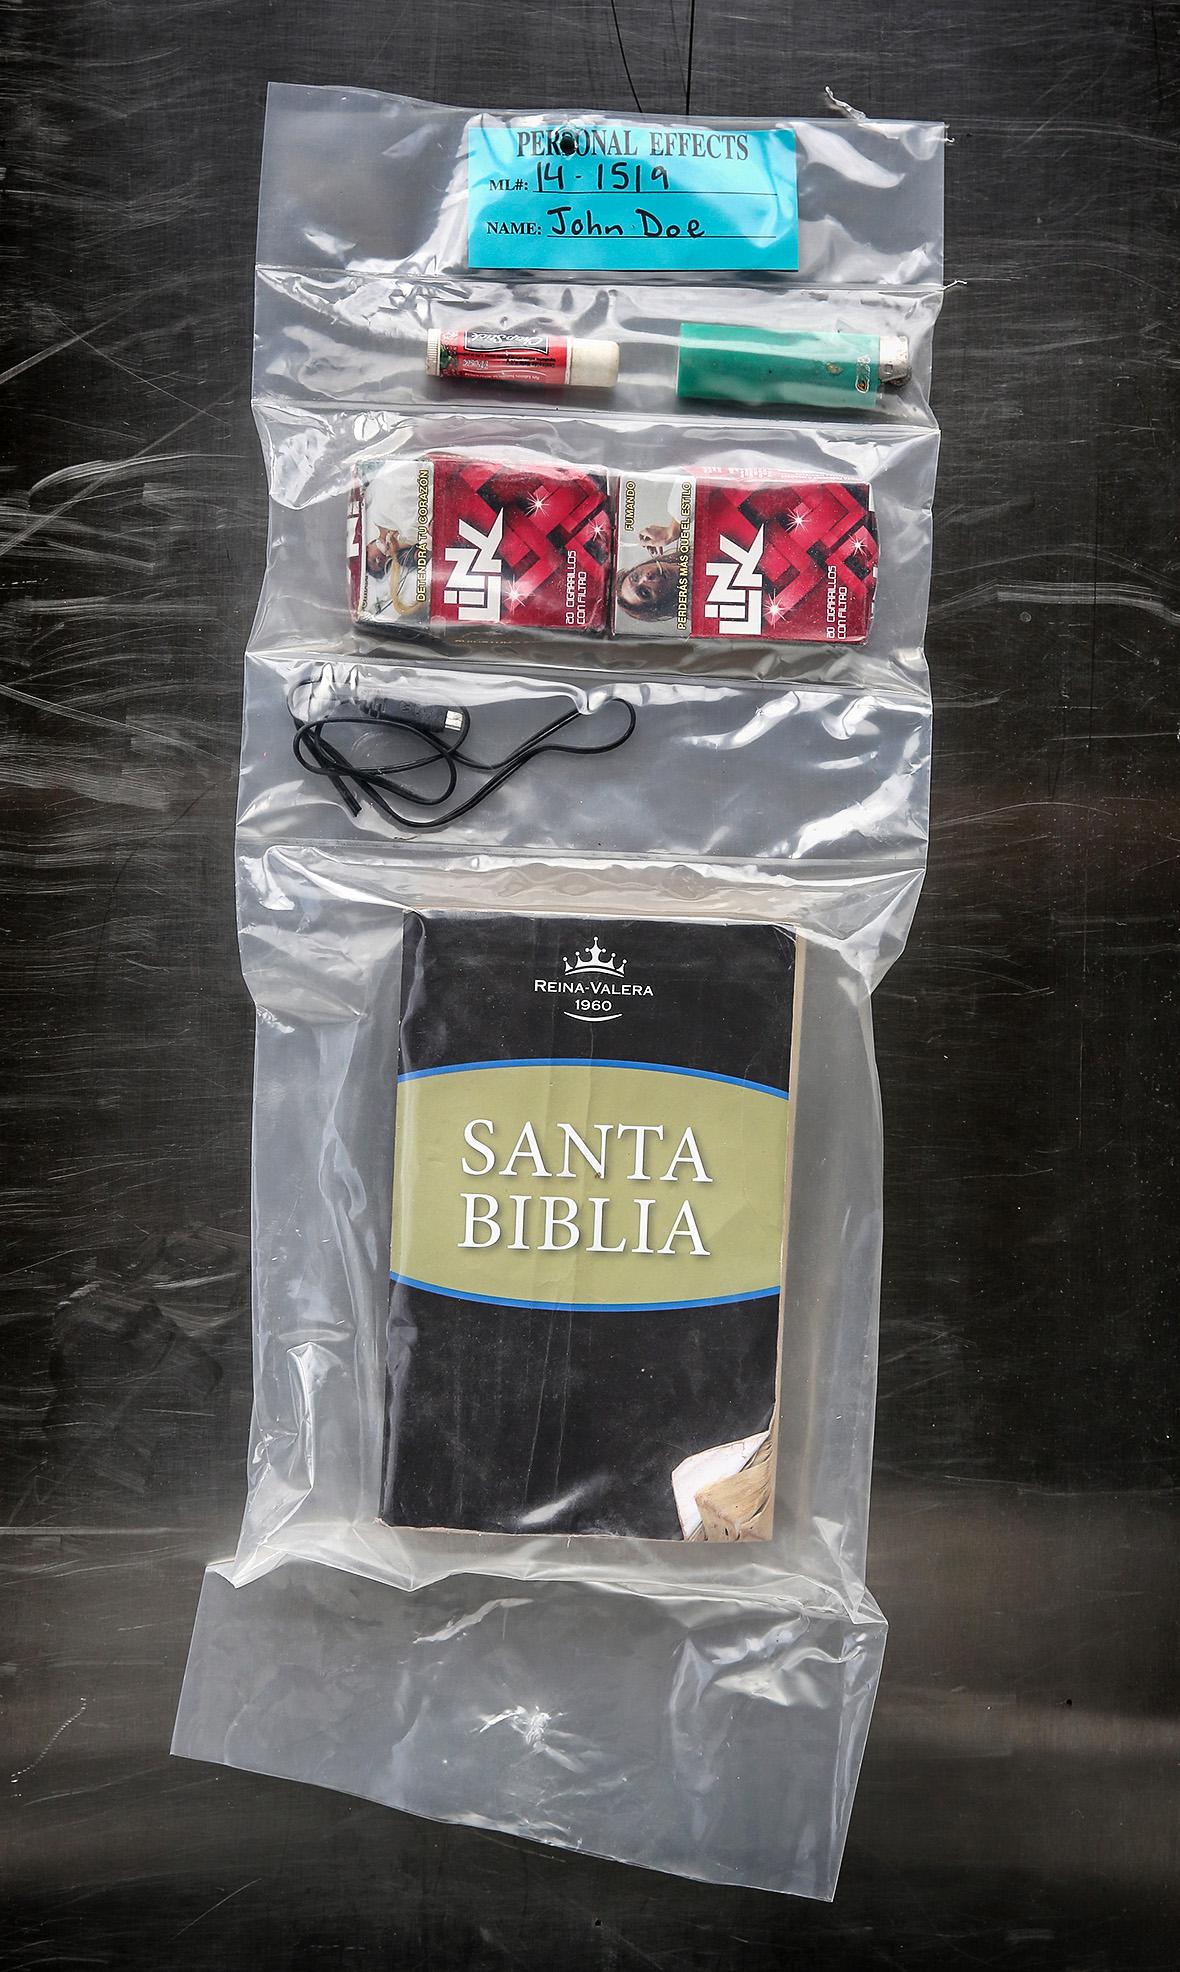 Chapstick, a lighter, cigarettes, a power chord, and a bible, found on the mummified remains of a Guatemalan male in the Arizona desert on June 19, 2014. 